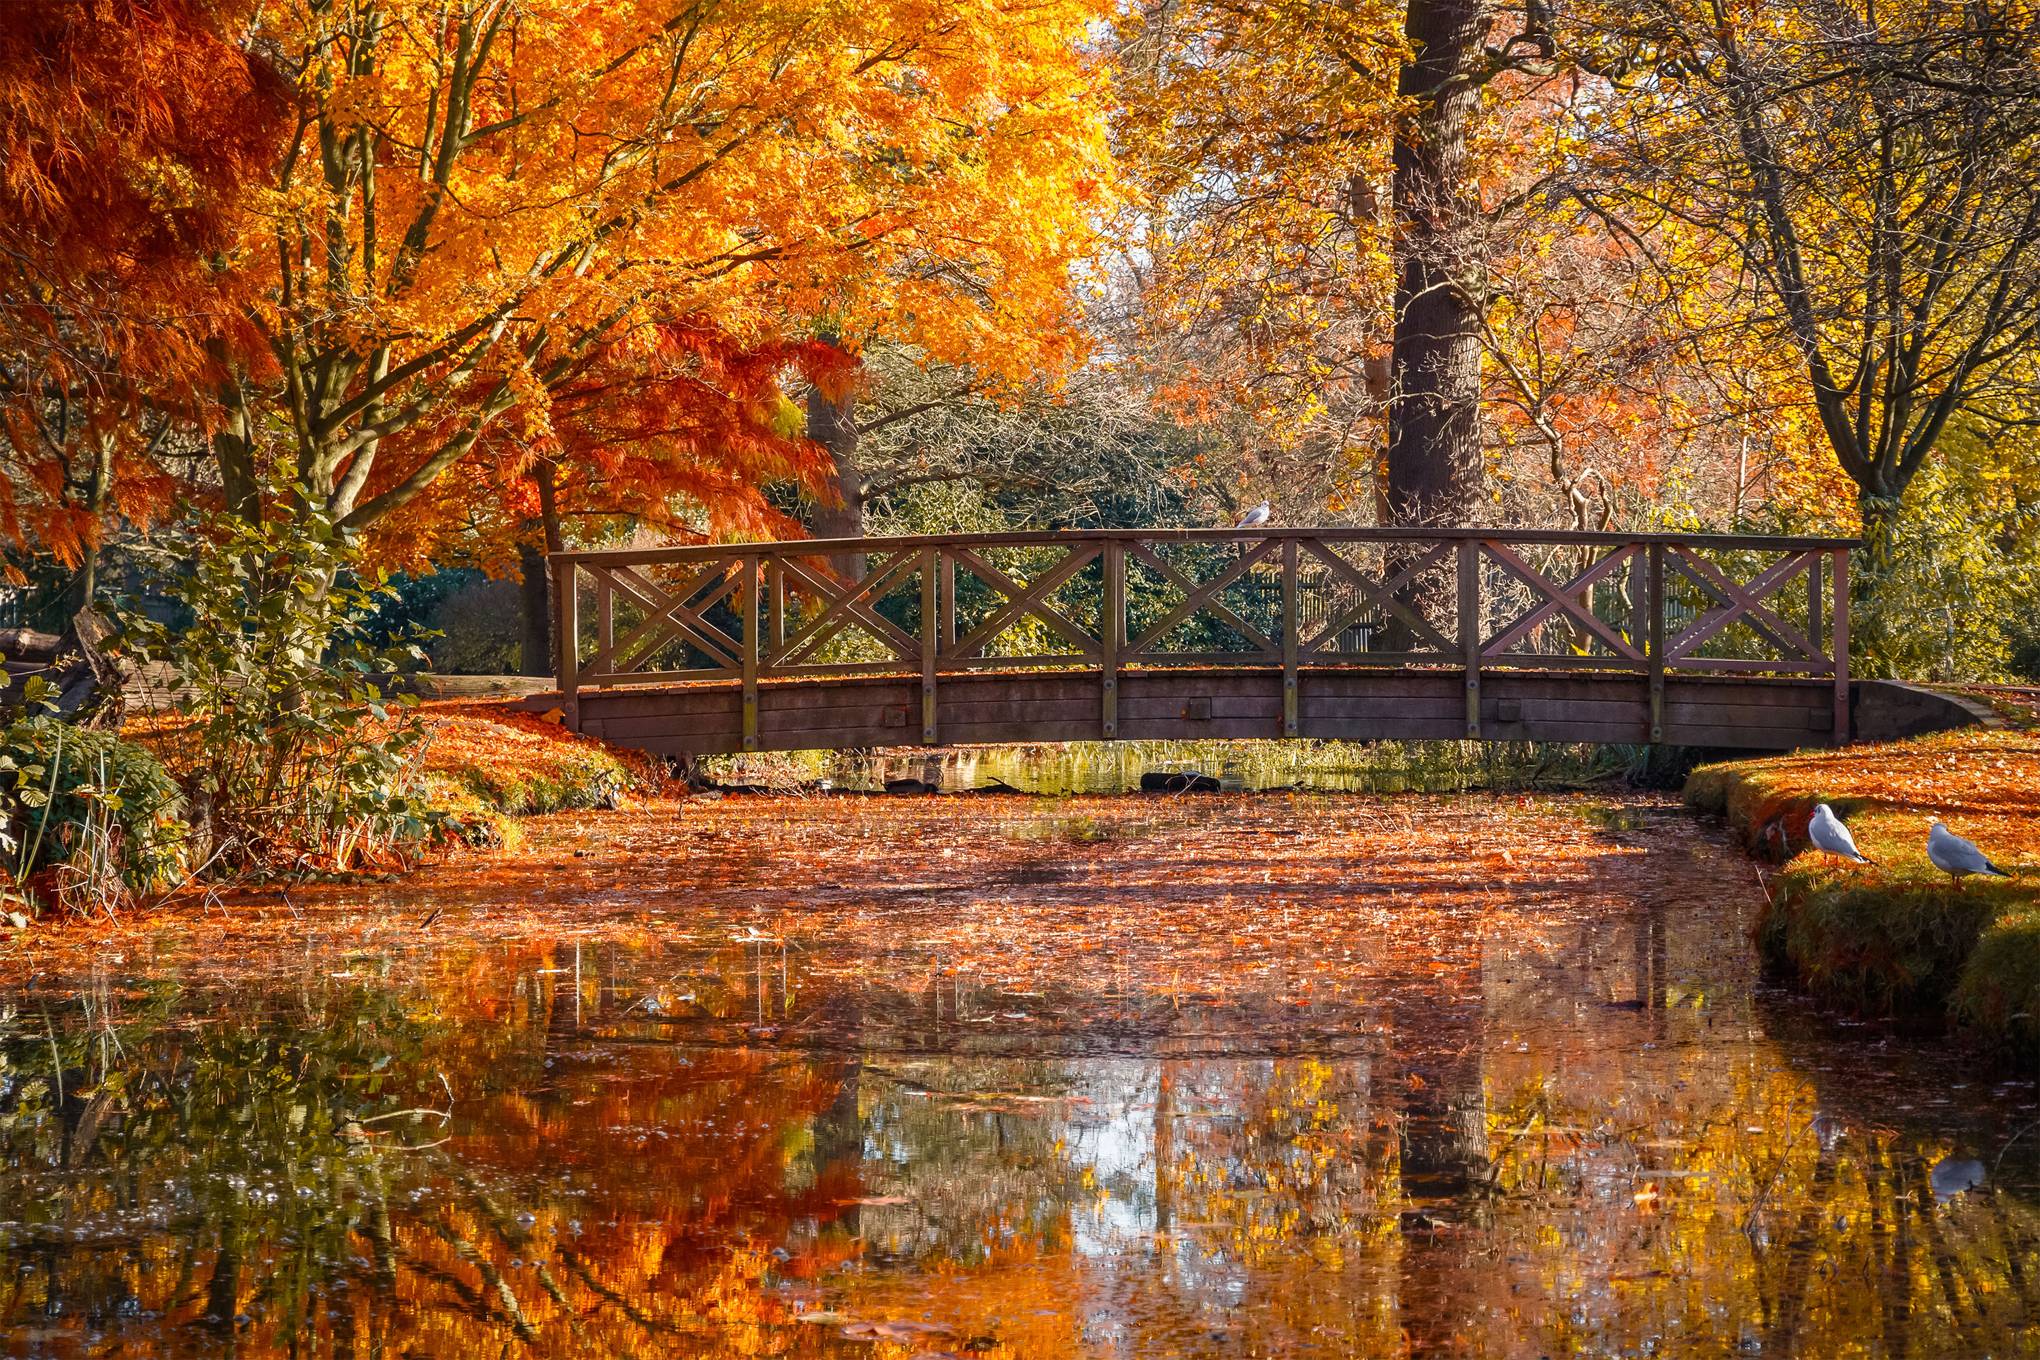 places to visit in uk during autumn